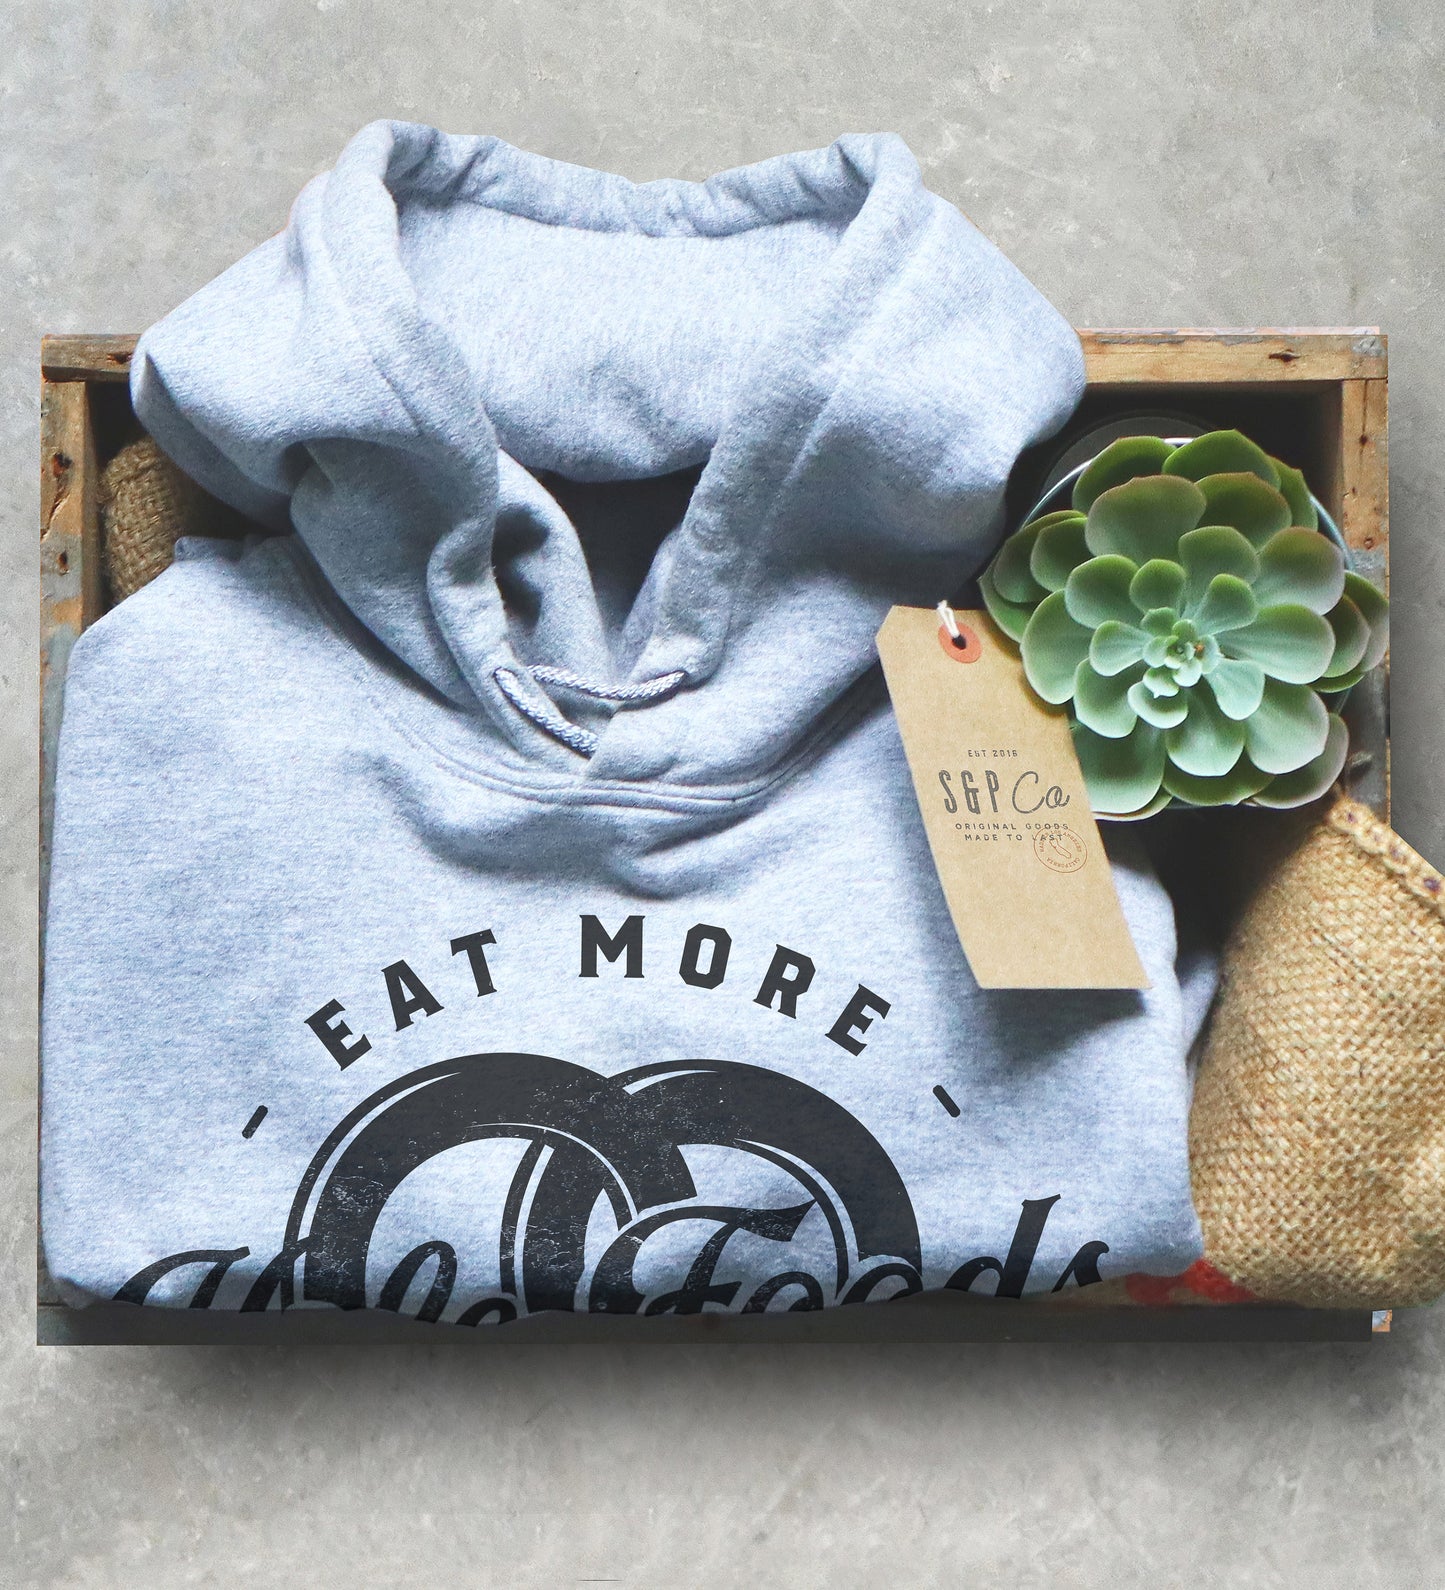 Eat More Hole Foods Unisex Hoodie - Pretzel Lover Shirt, Chicago Shirt, NYC Shirt, Baking Sweater, Snack Goals Shirt, Funny Food Lover Gift